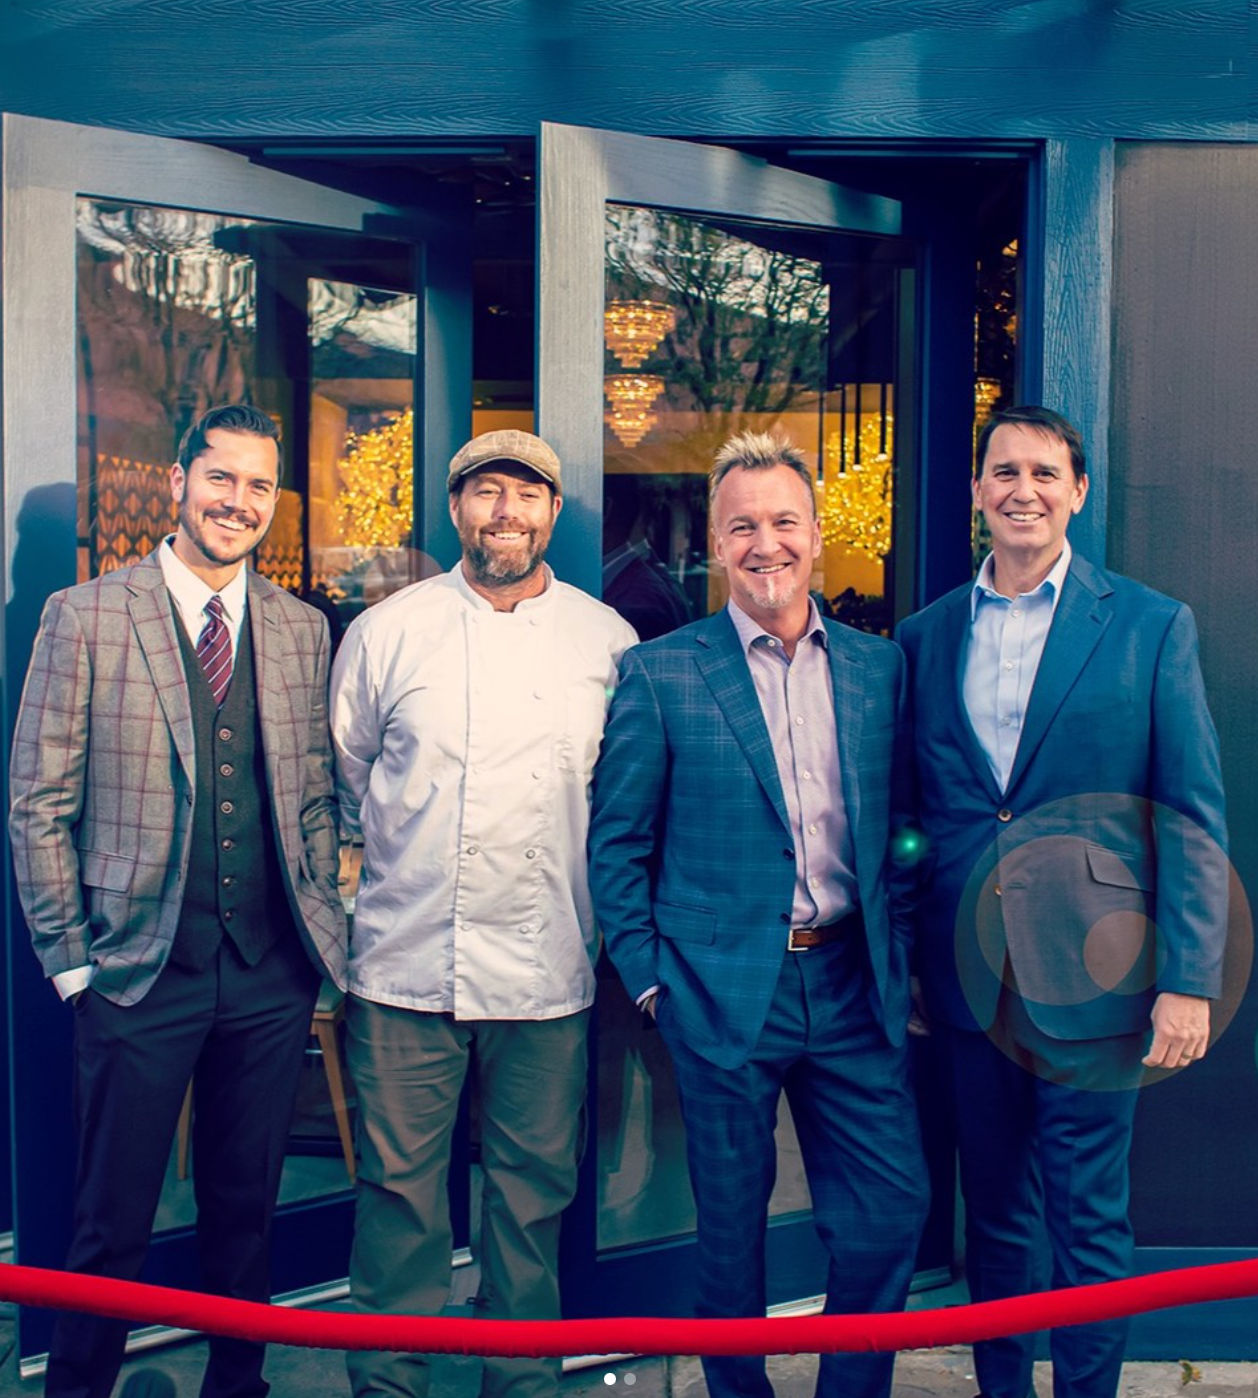 Teatro Italian Food & Wine: Nick Williams, Mike Schmitz, Lance Reynolds, Kevin Heiononen of THAT Place Projects